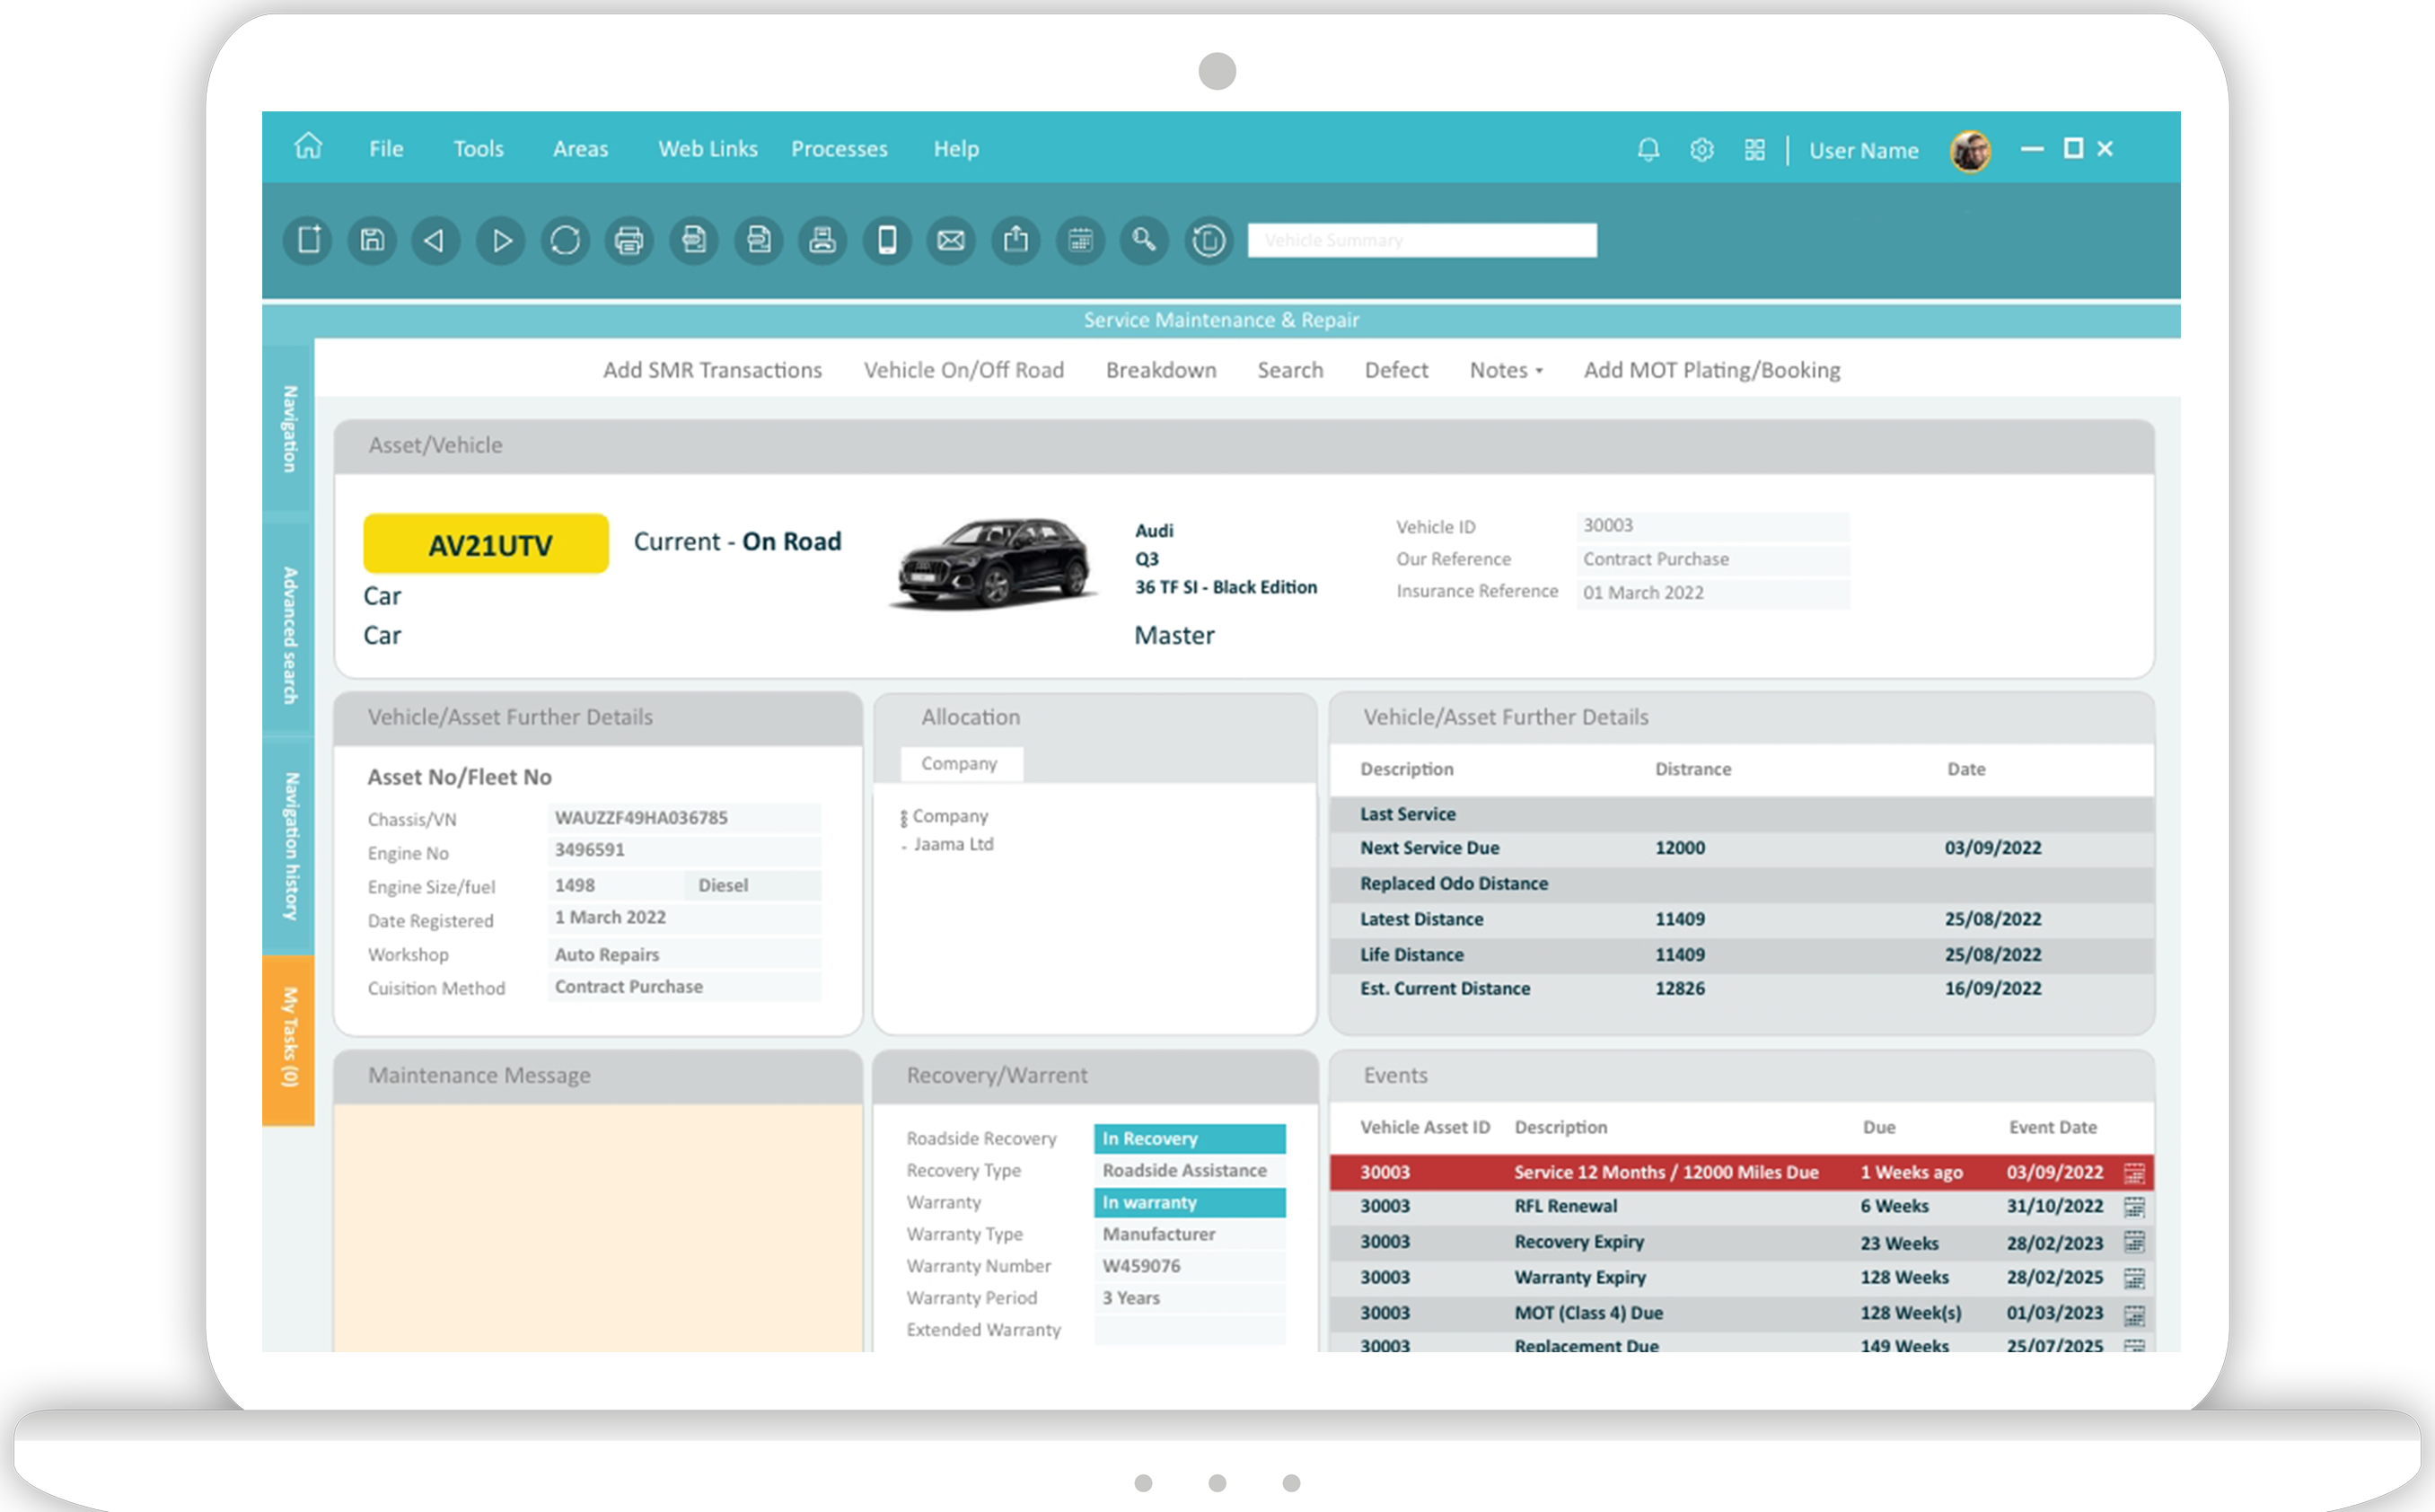 Jaama Vehicle Management Software Screen showing Service, Maintenance and Repair